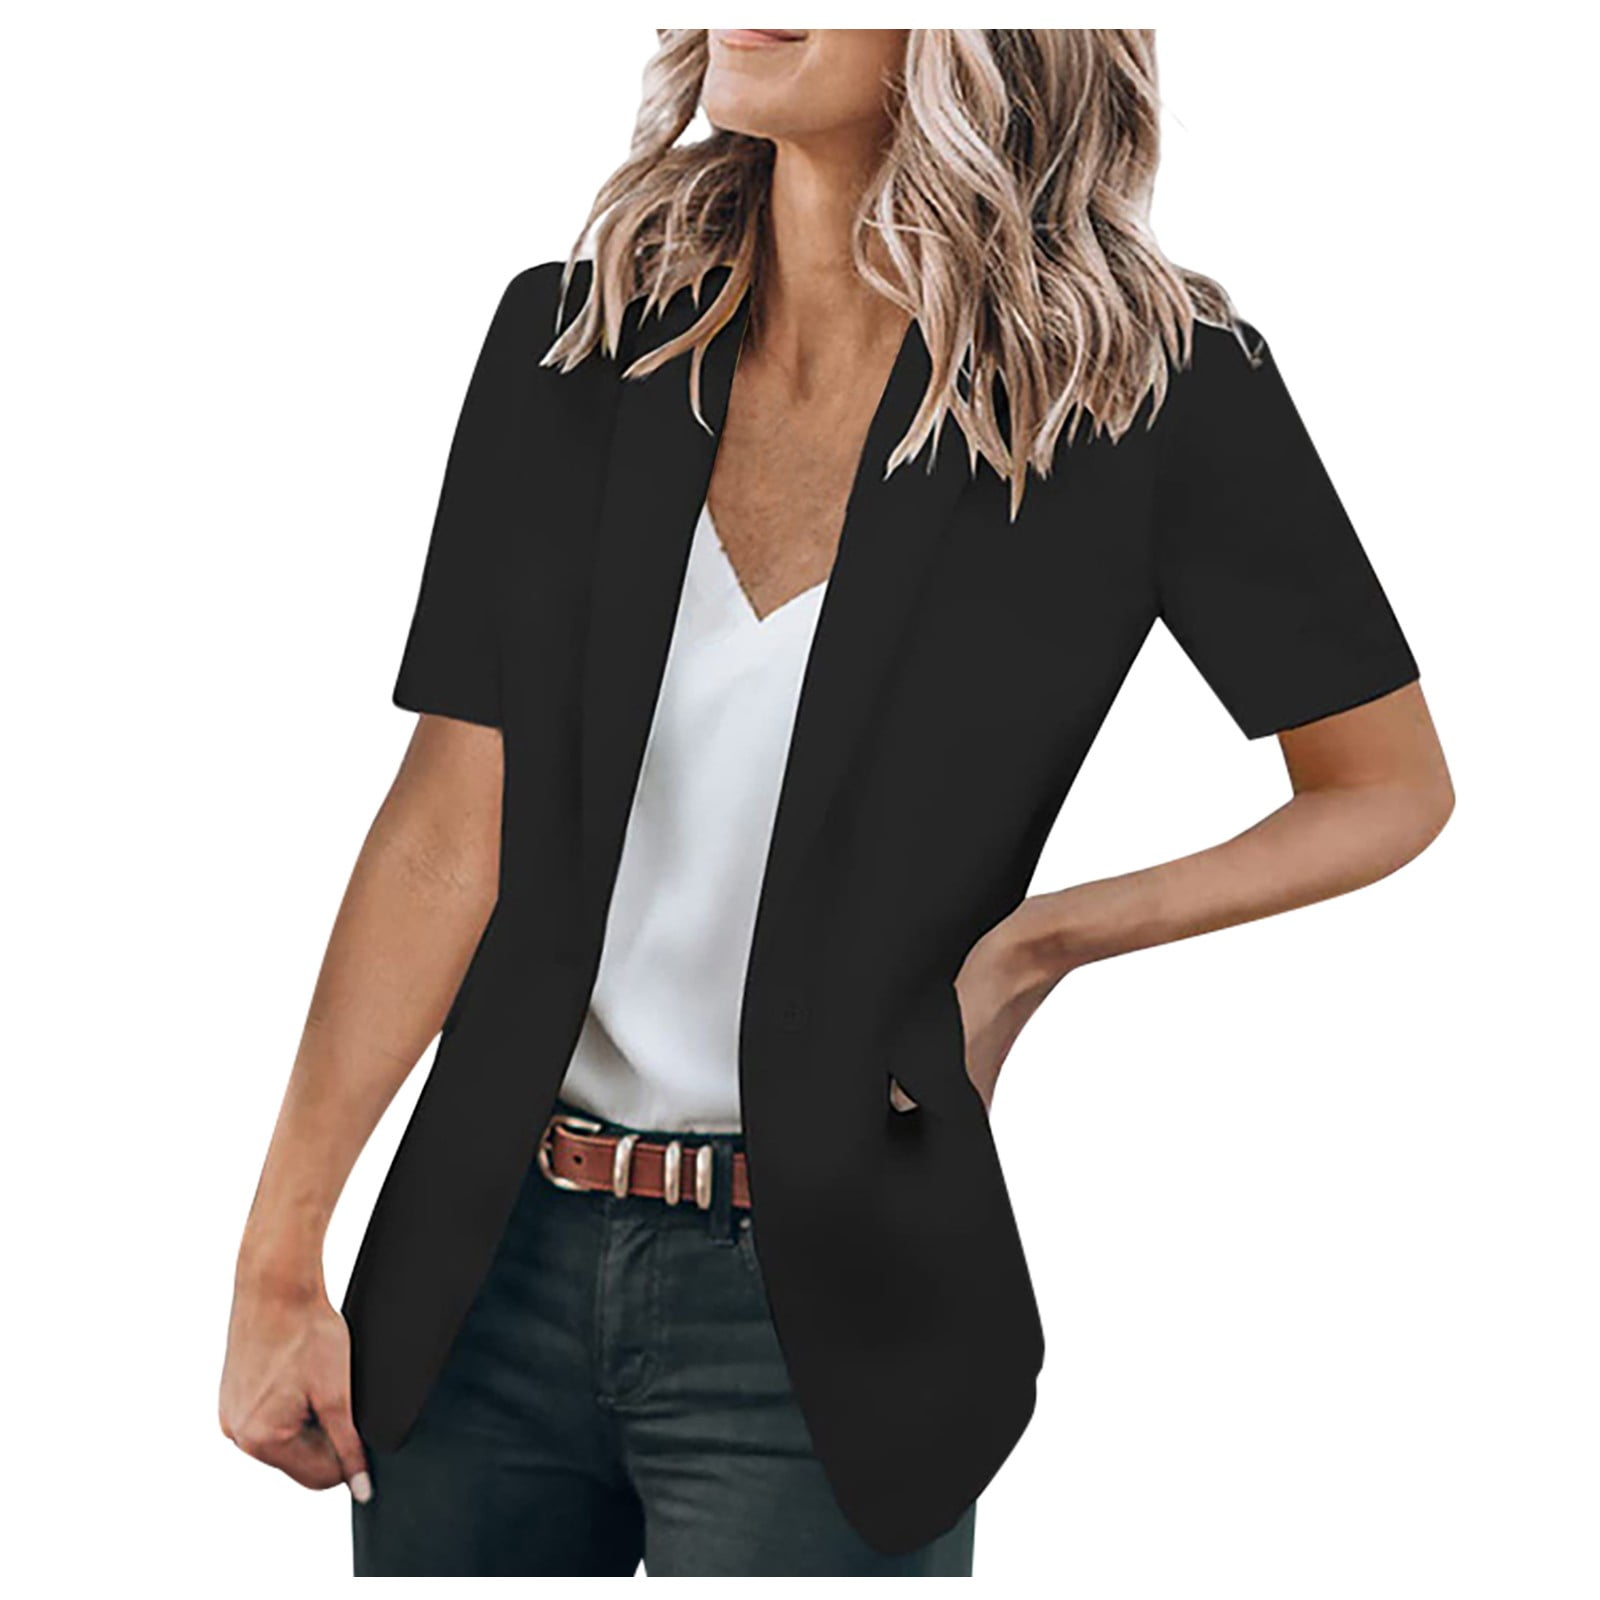 TKing Fashion Womens Cardigan Solid Color Open Front Pocket Cardigan ...